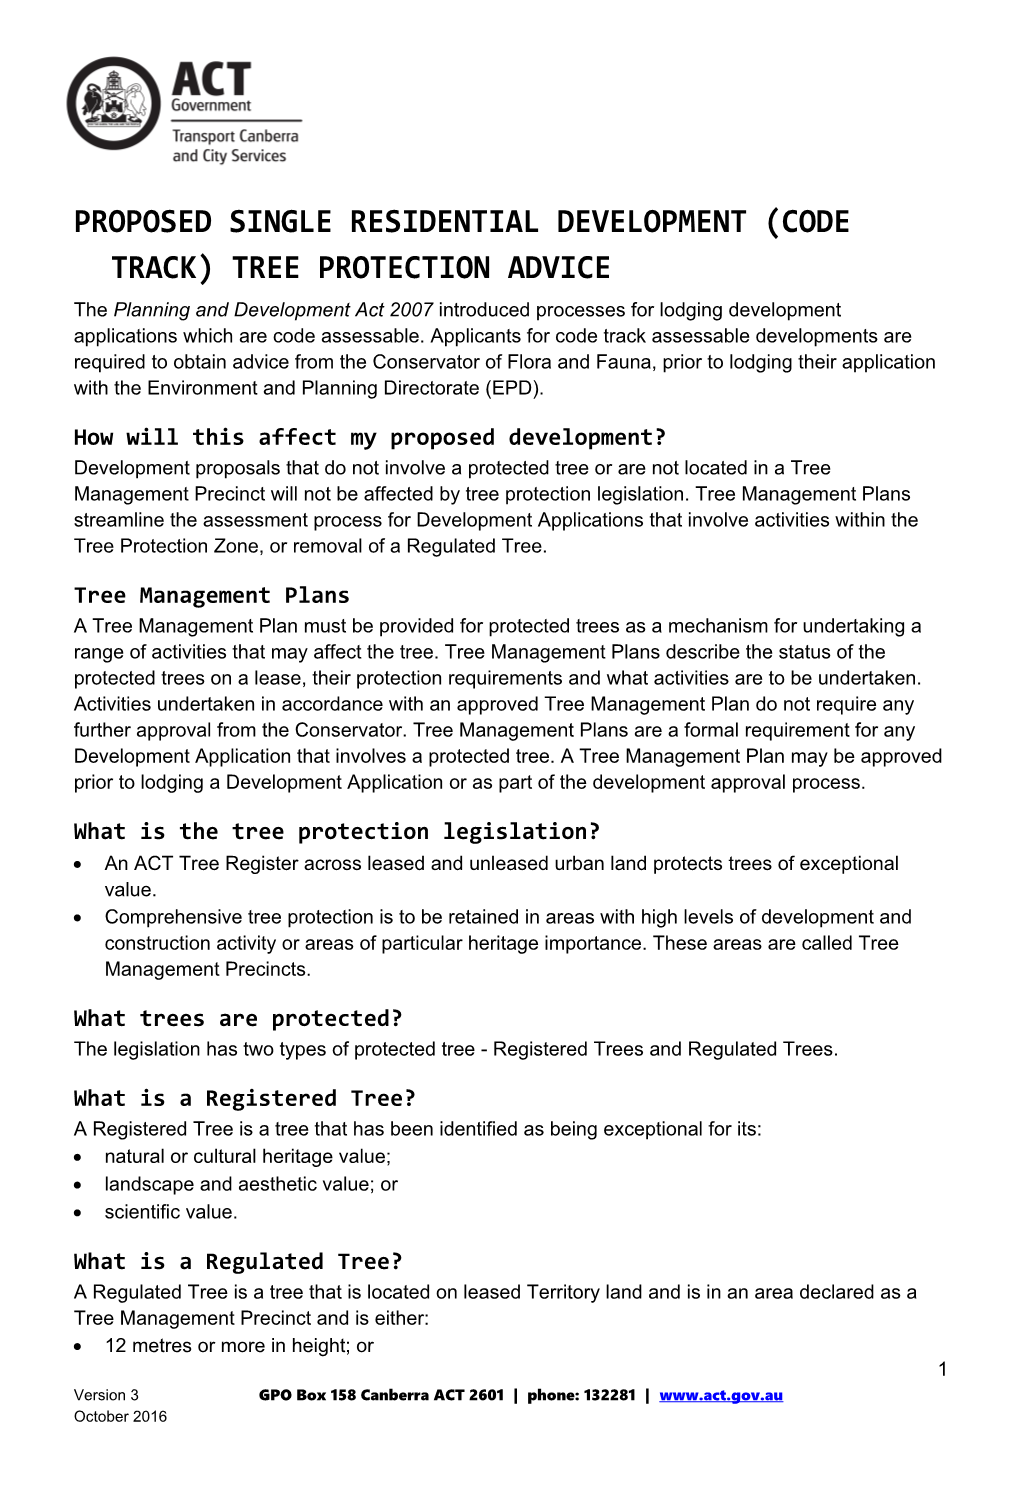 Proposed Single Residential Development (Code Track) Tree Protection Advice